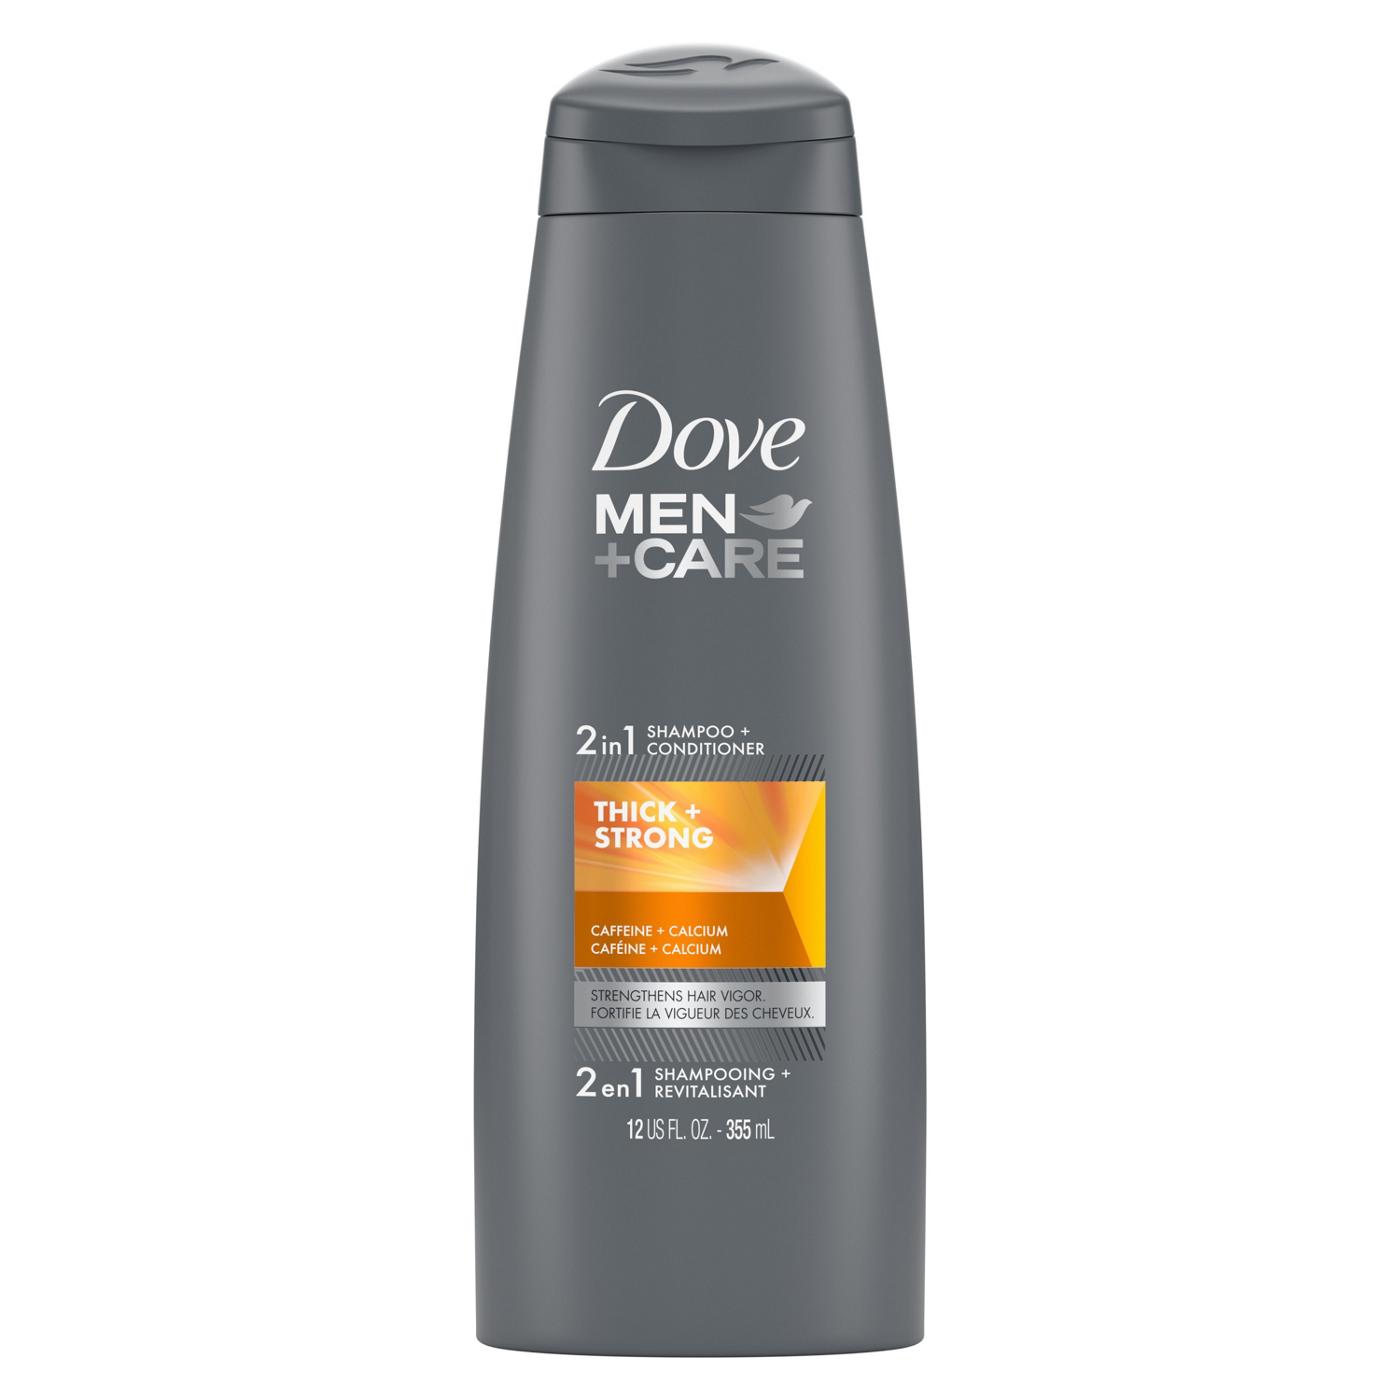 Dove Men+Care Fortifying 2-in-1 + Conditioner Thick & Strong with Caffeine - Shop Shampoo & Conditioner at H-E-B